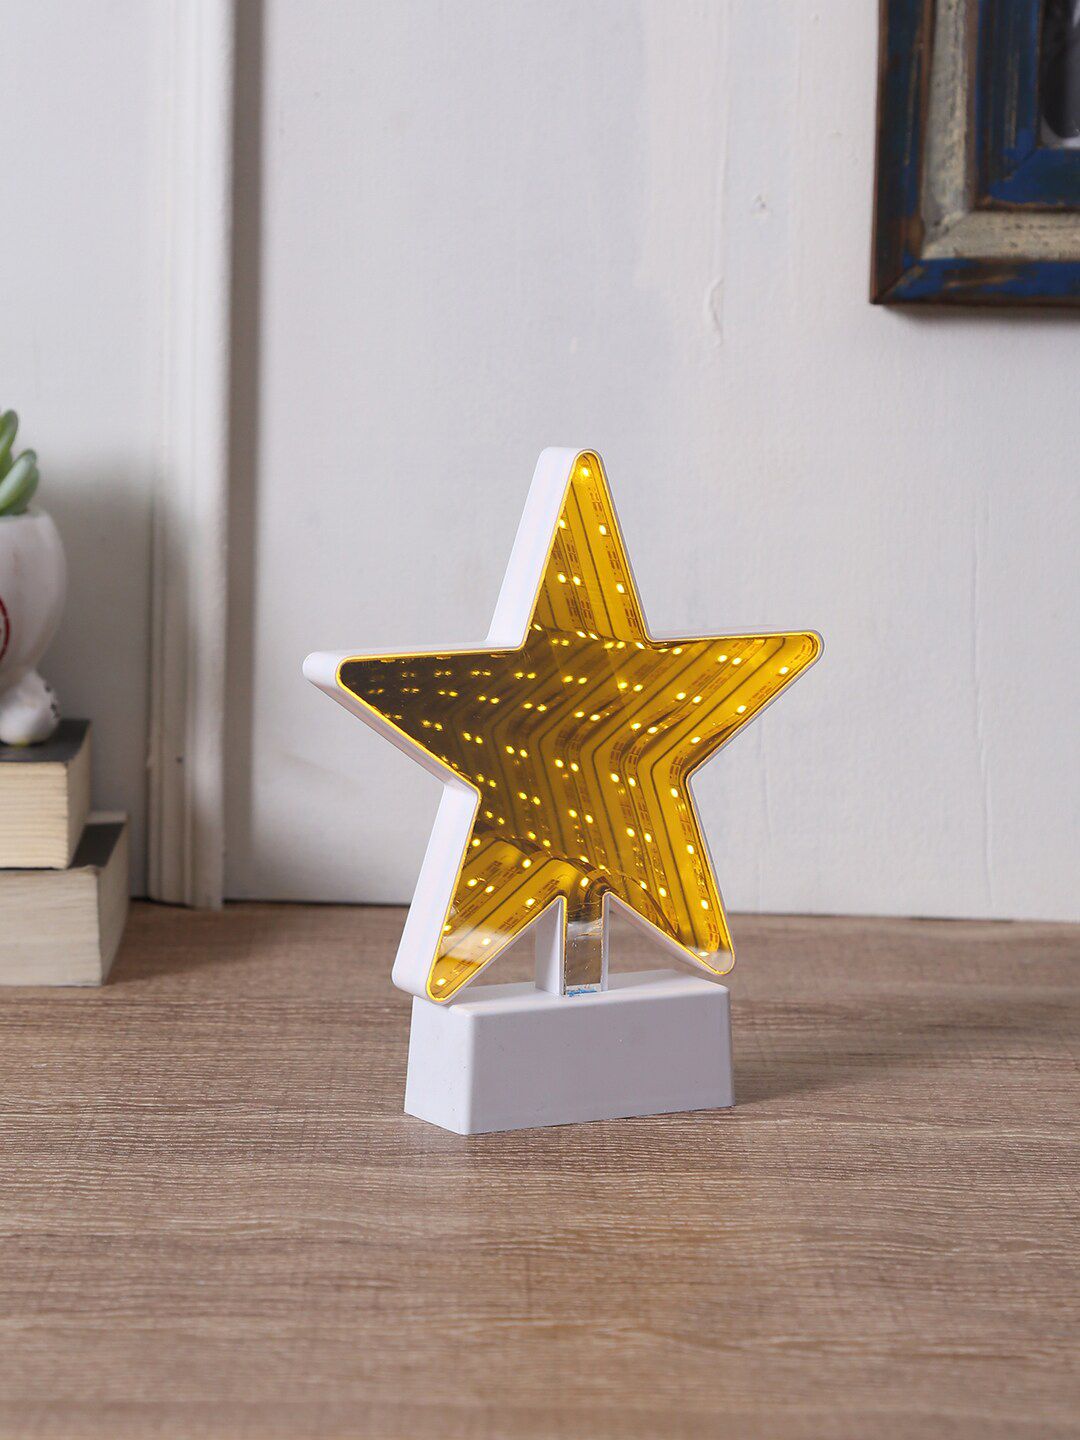 TAYHAA Star Shaped LED Lighting with Mirror Price in India